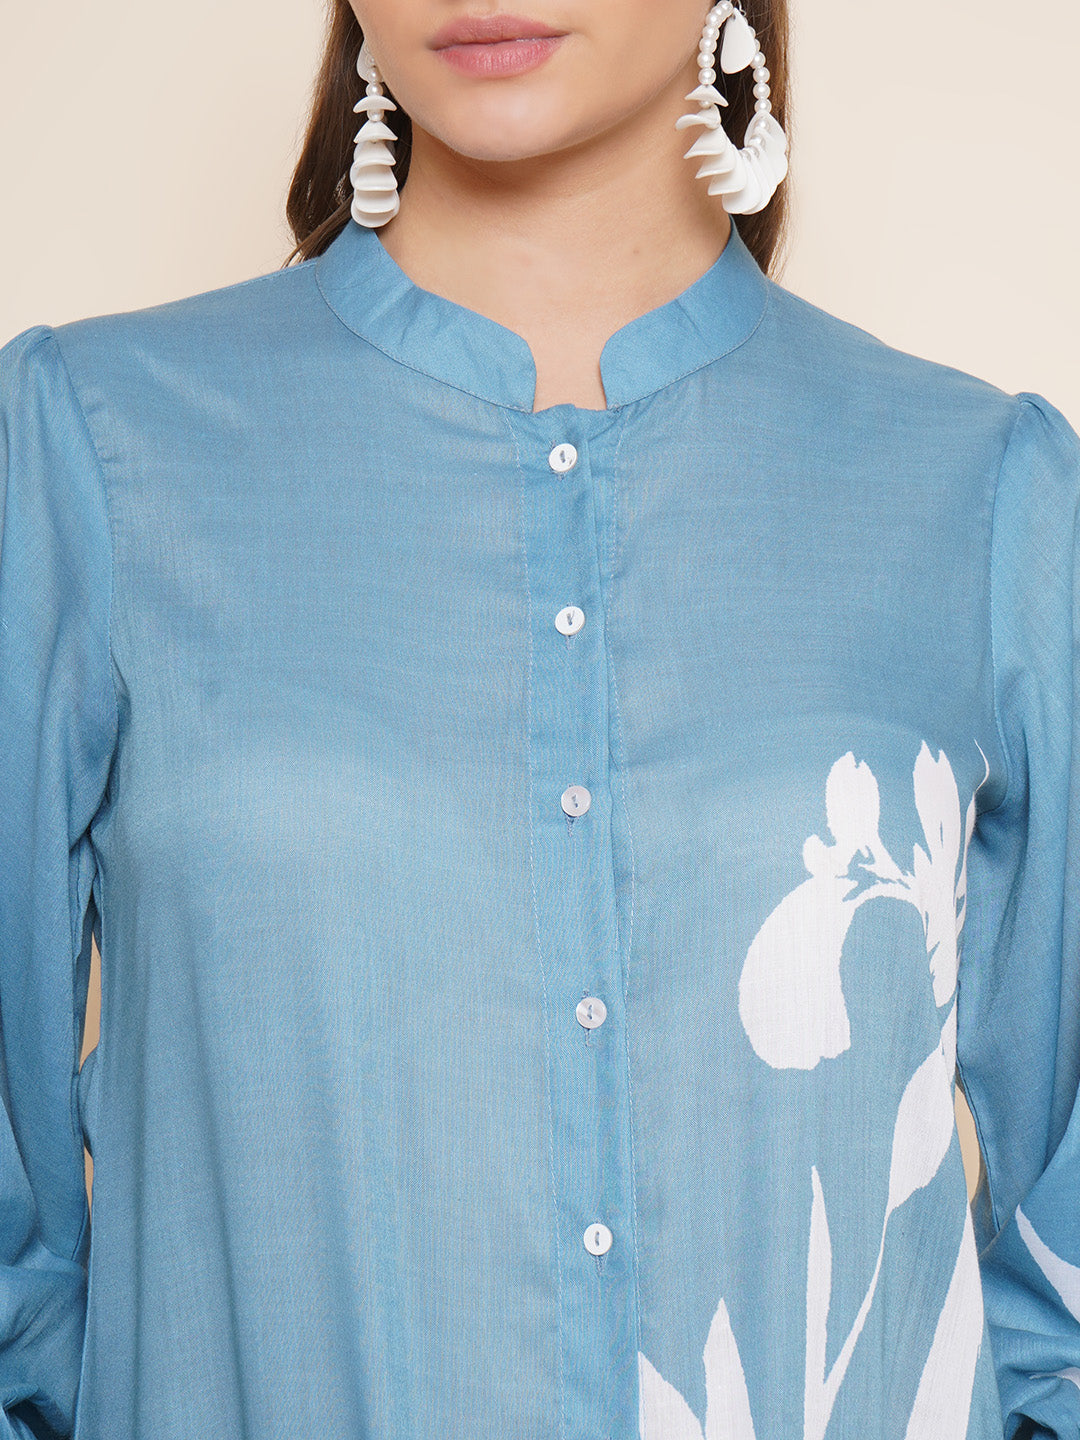 Bhama Couture Blue Printed Shirt Style Top